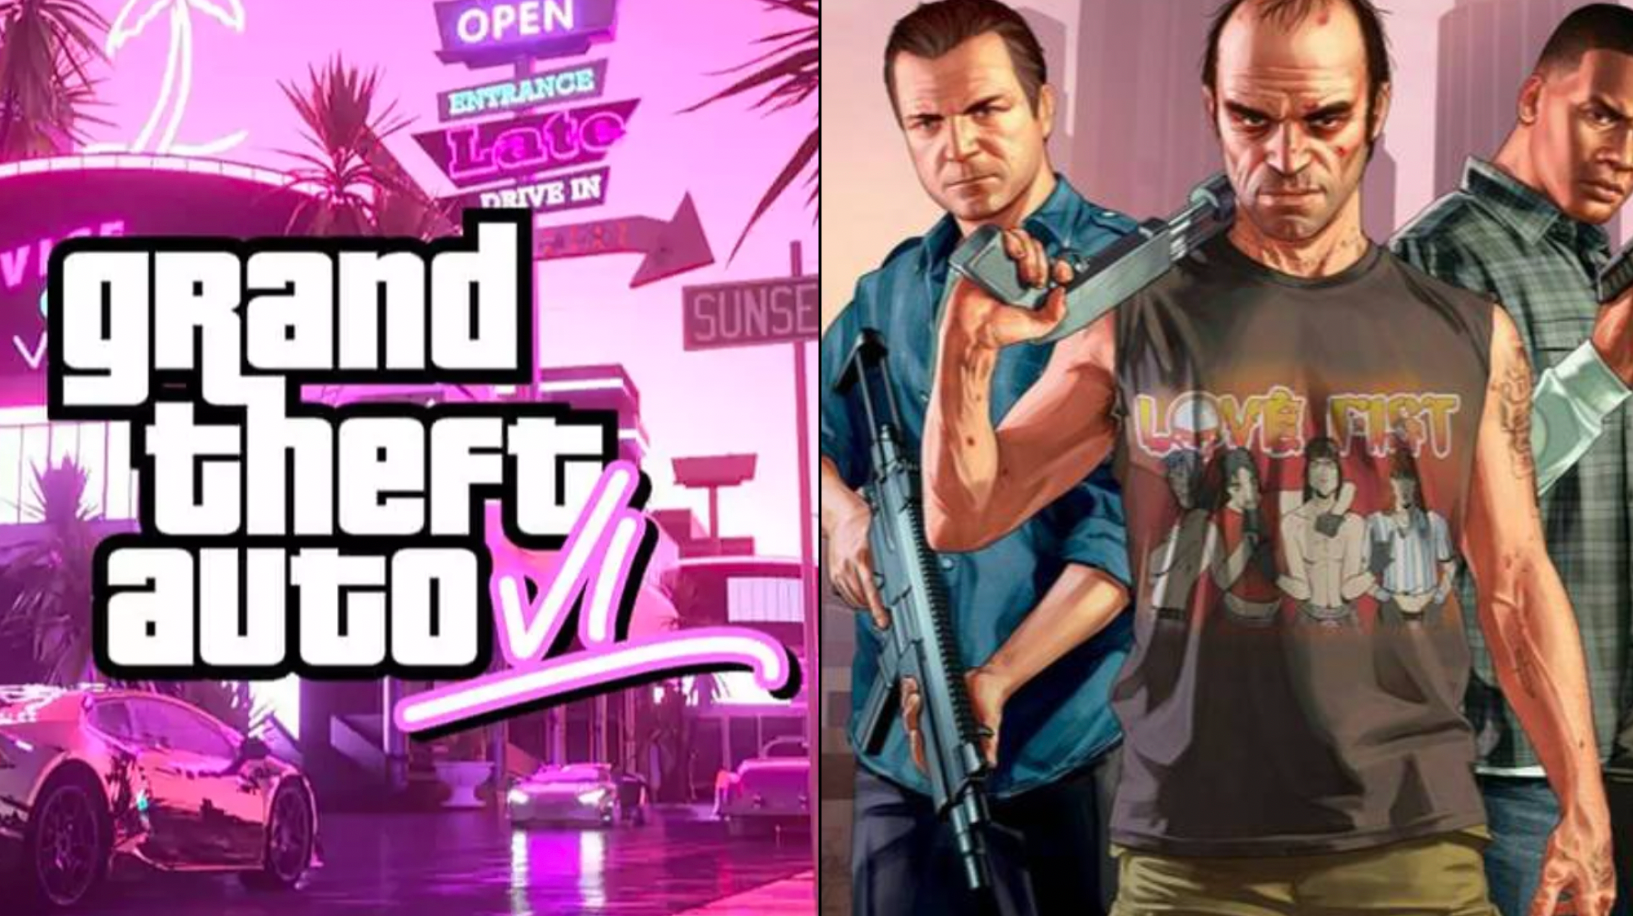 GTA 6 - Price revealed at 150$! Fans Shocked & Outraged